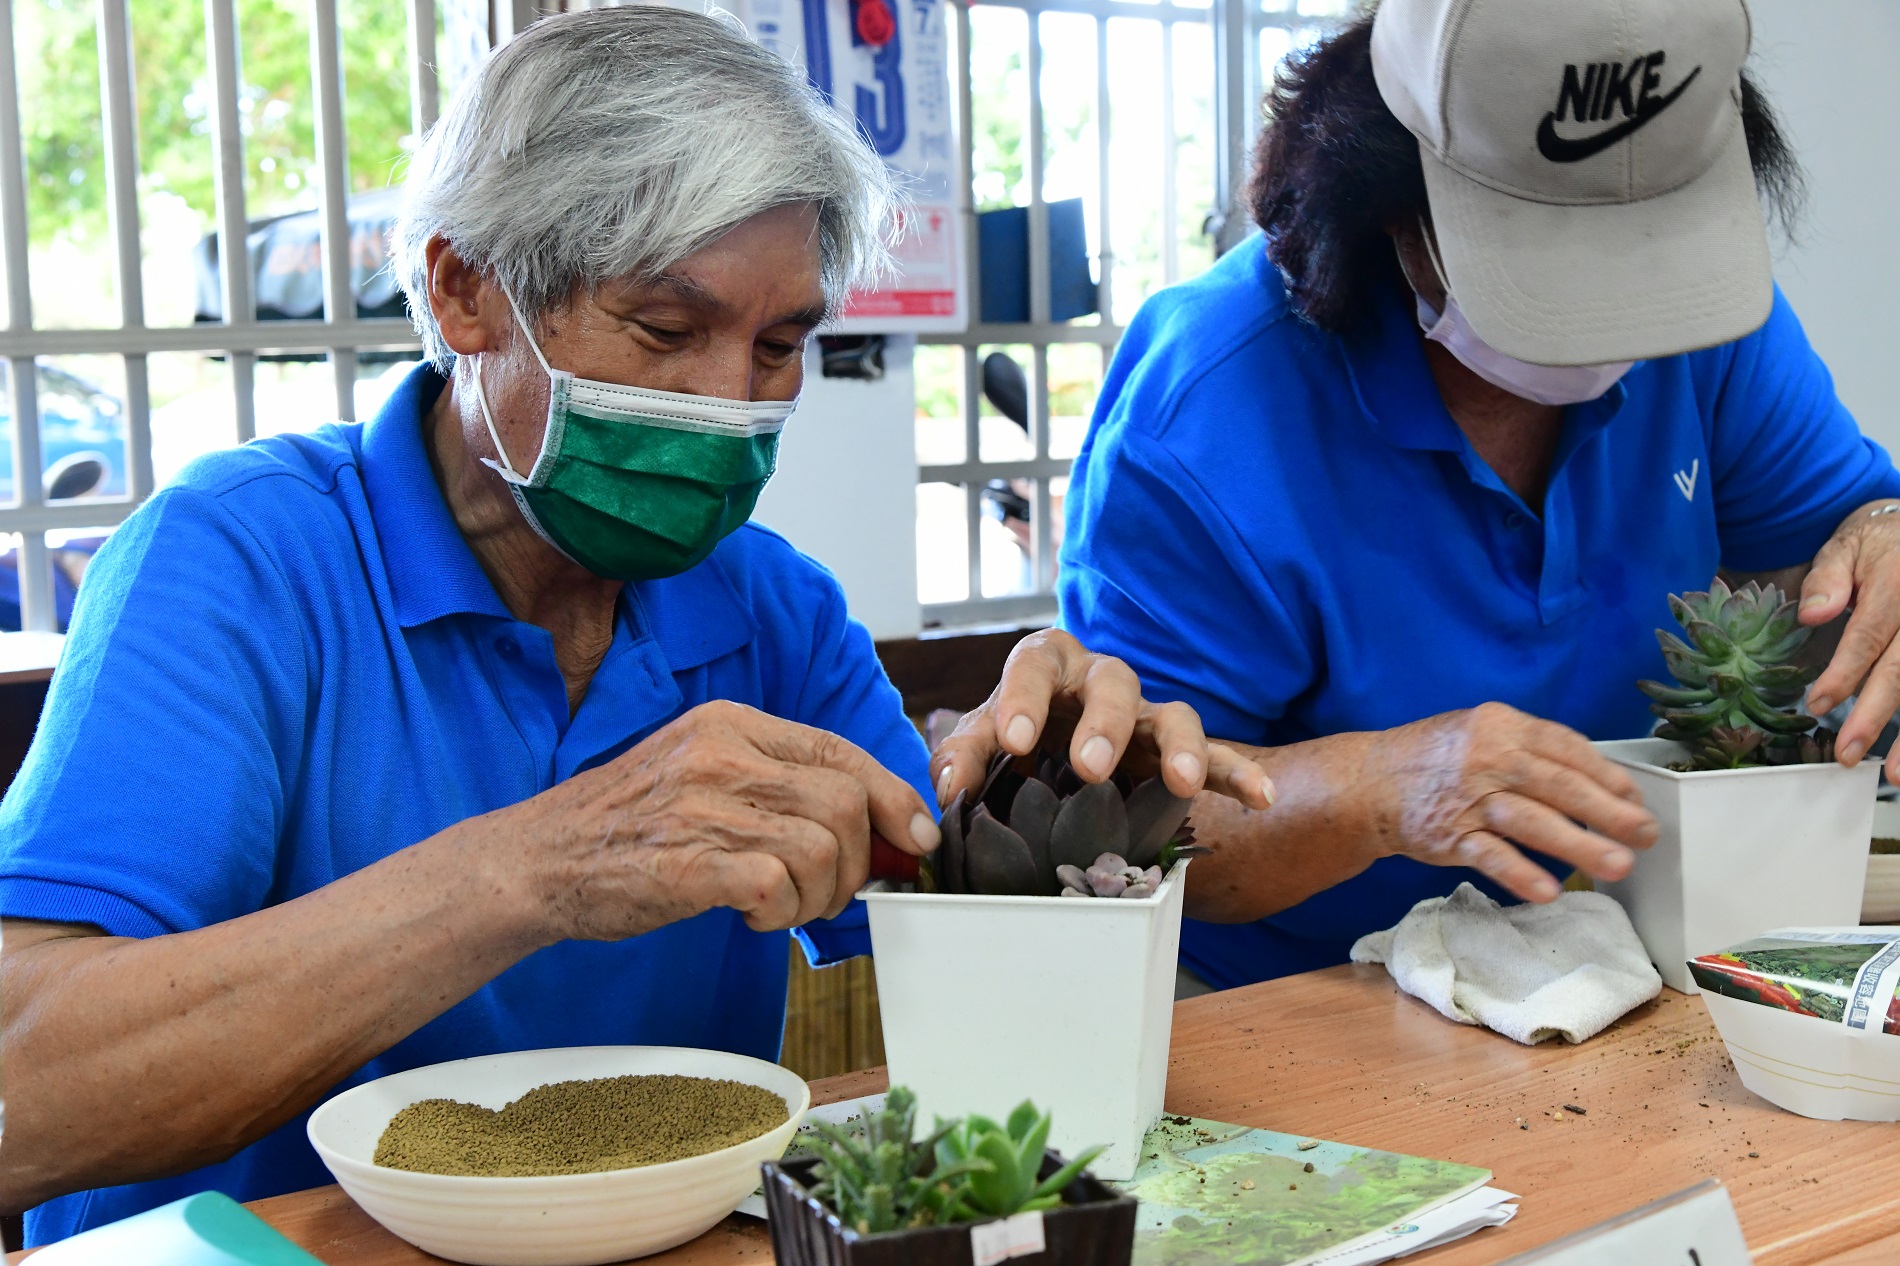 The workshop allowed attendees to experience the fun and relaxation of potting plants.